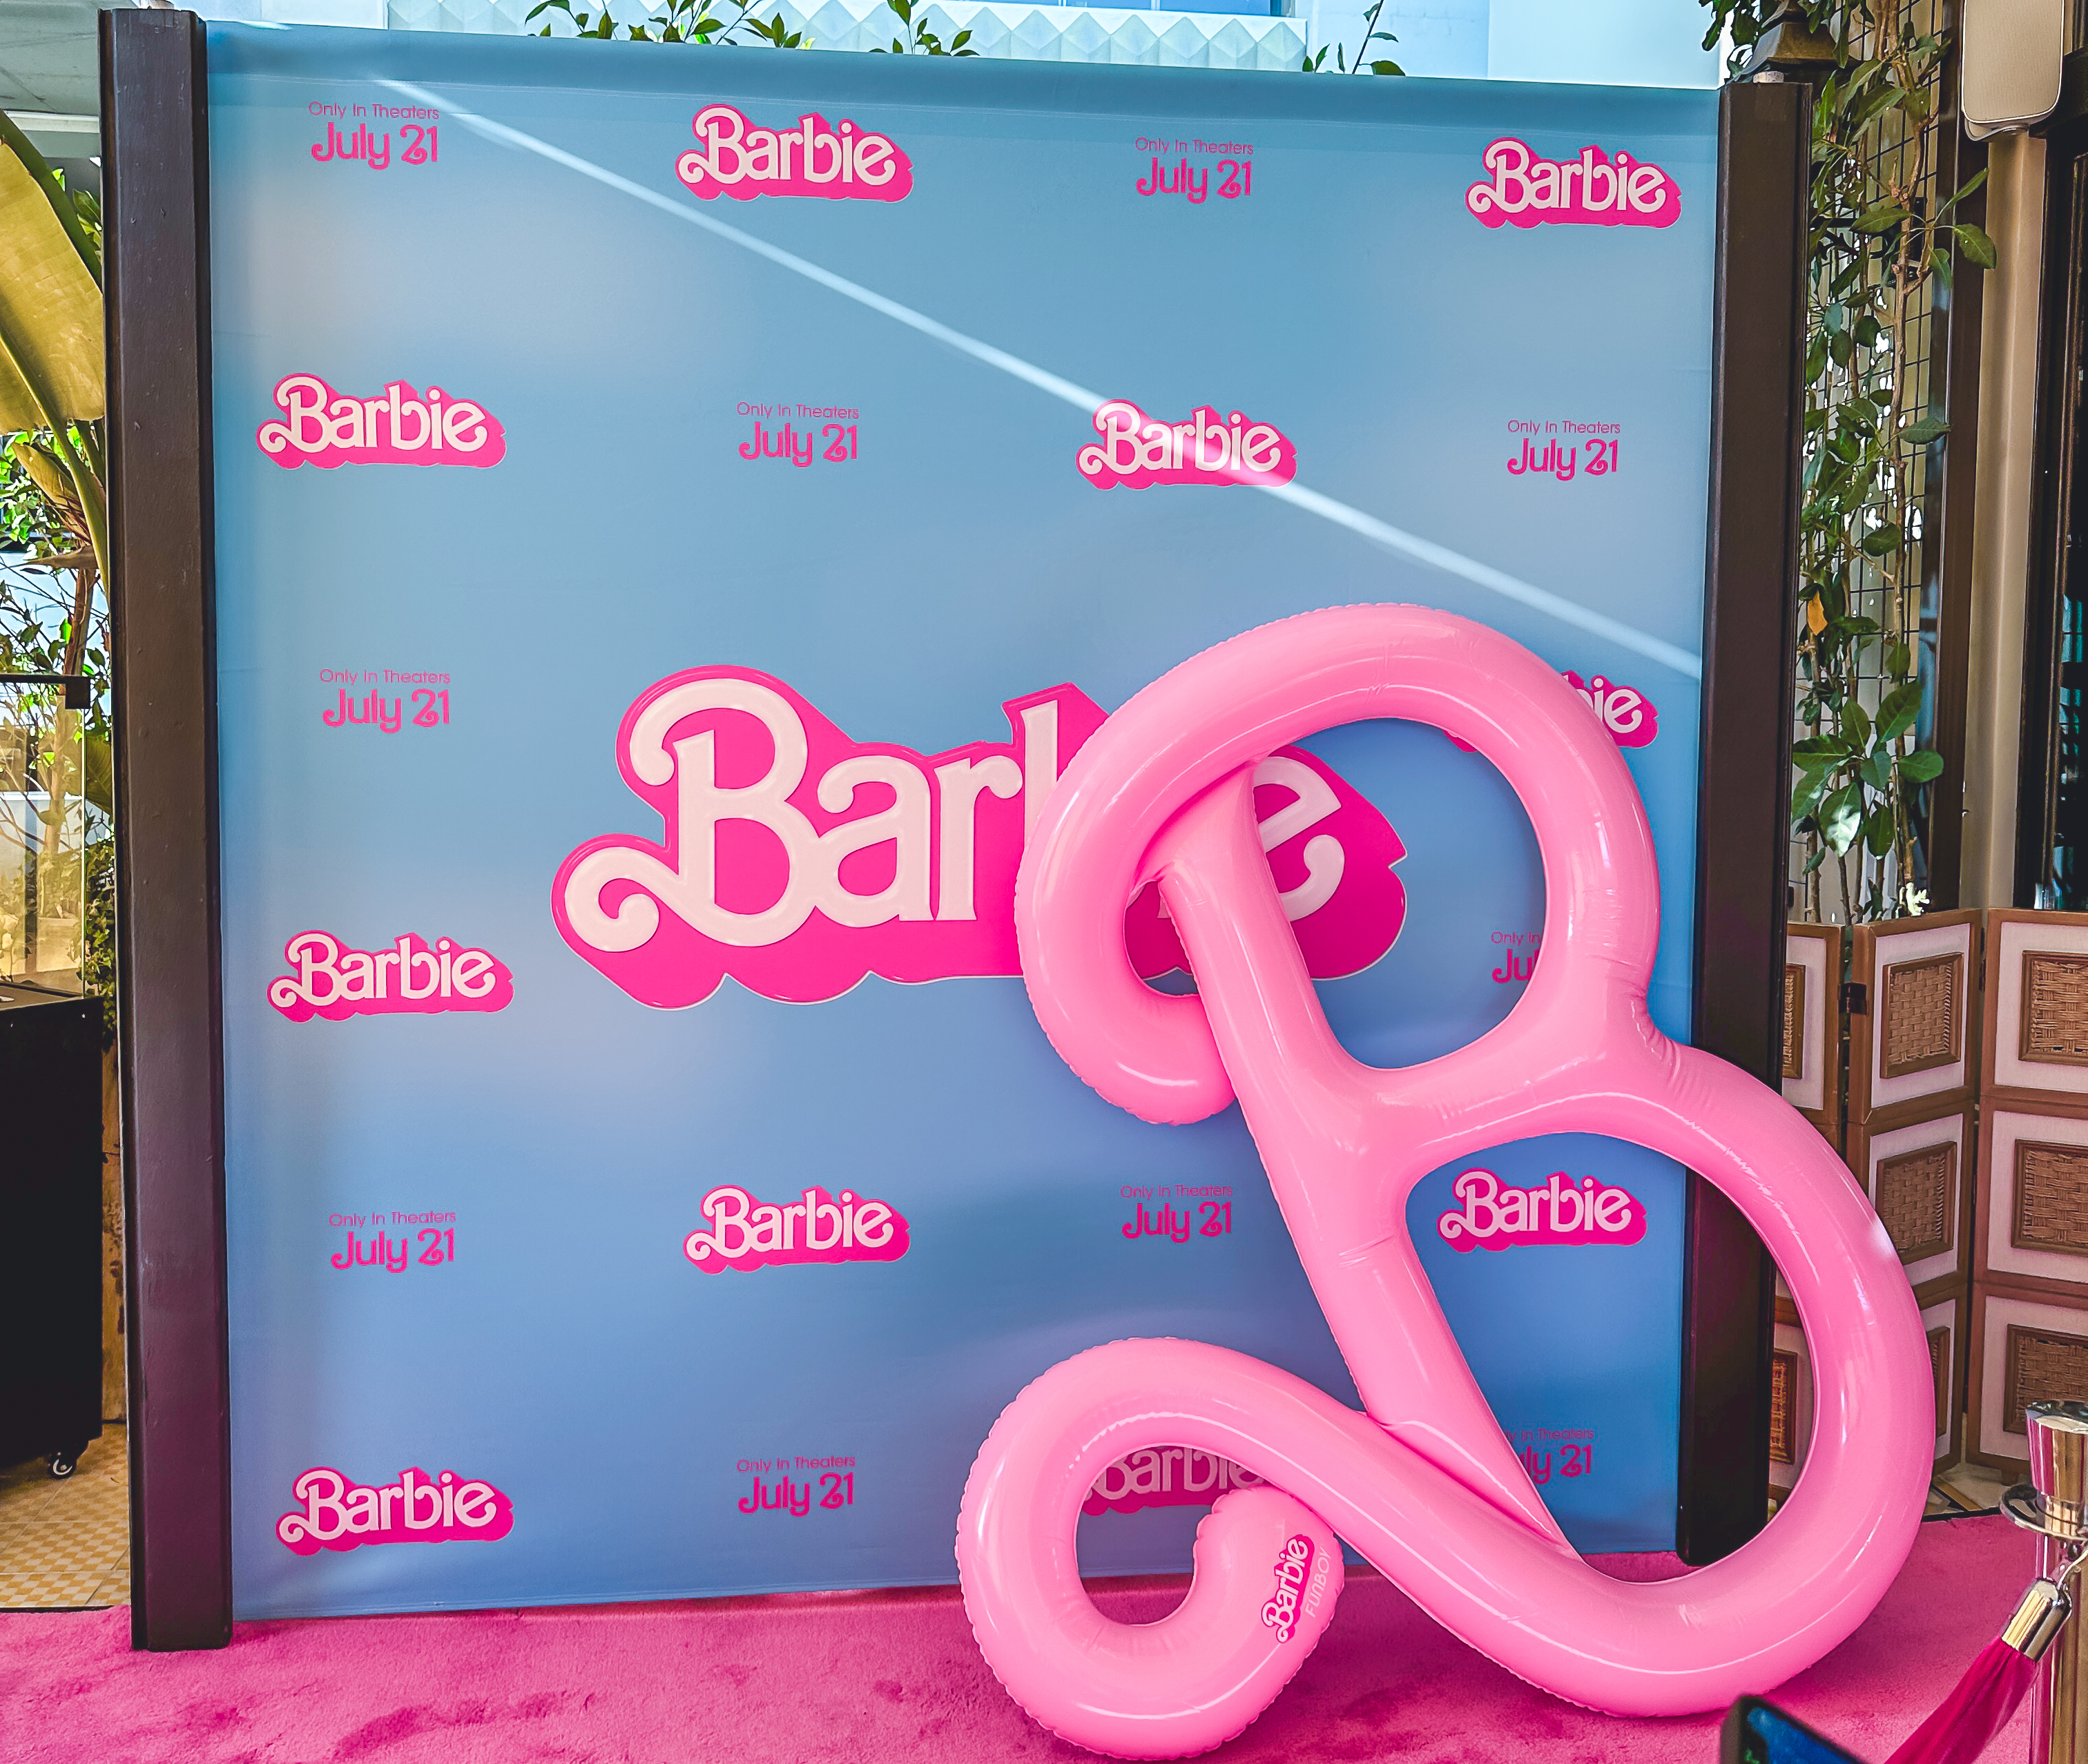 Blue Barbie backdrop with Barbie logos and a giant inflatable Barbie letter B